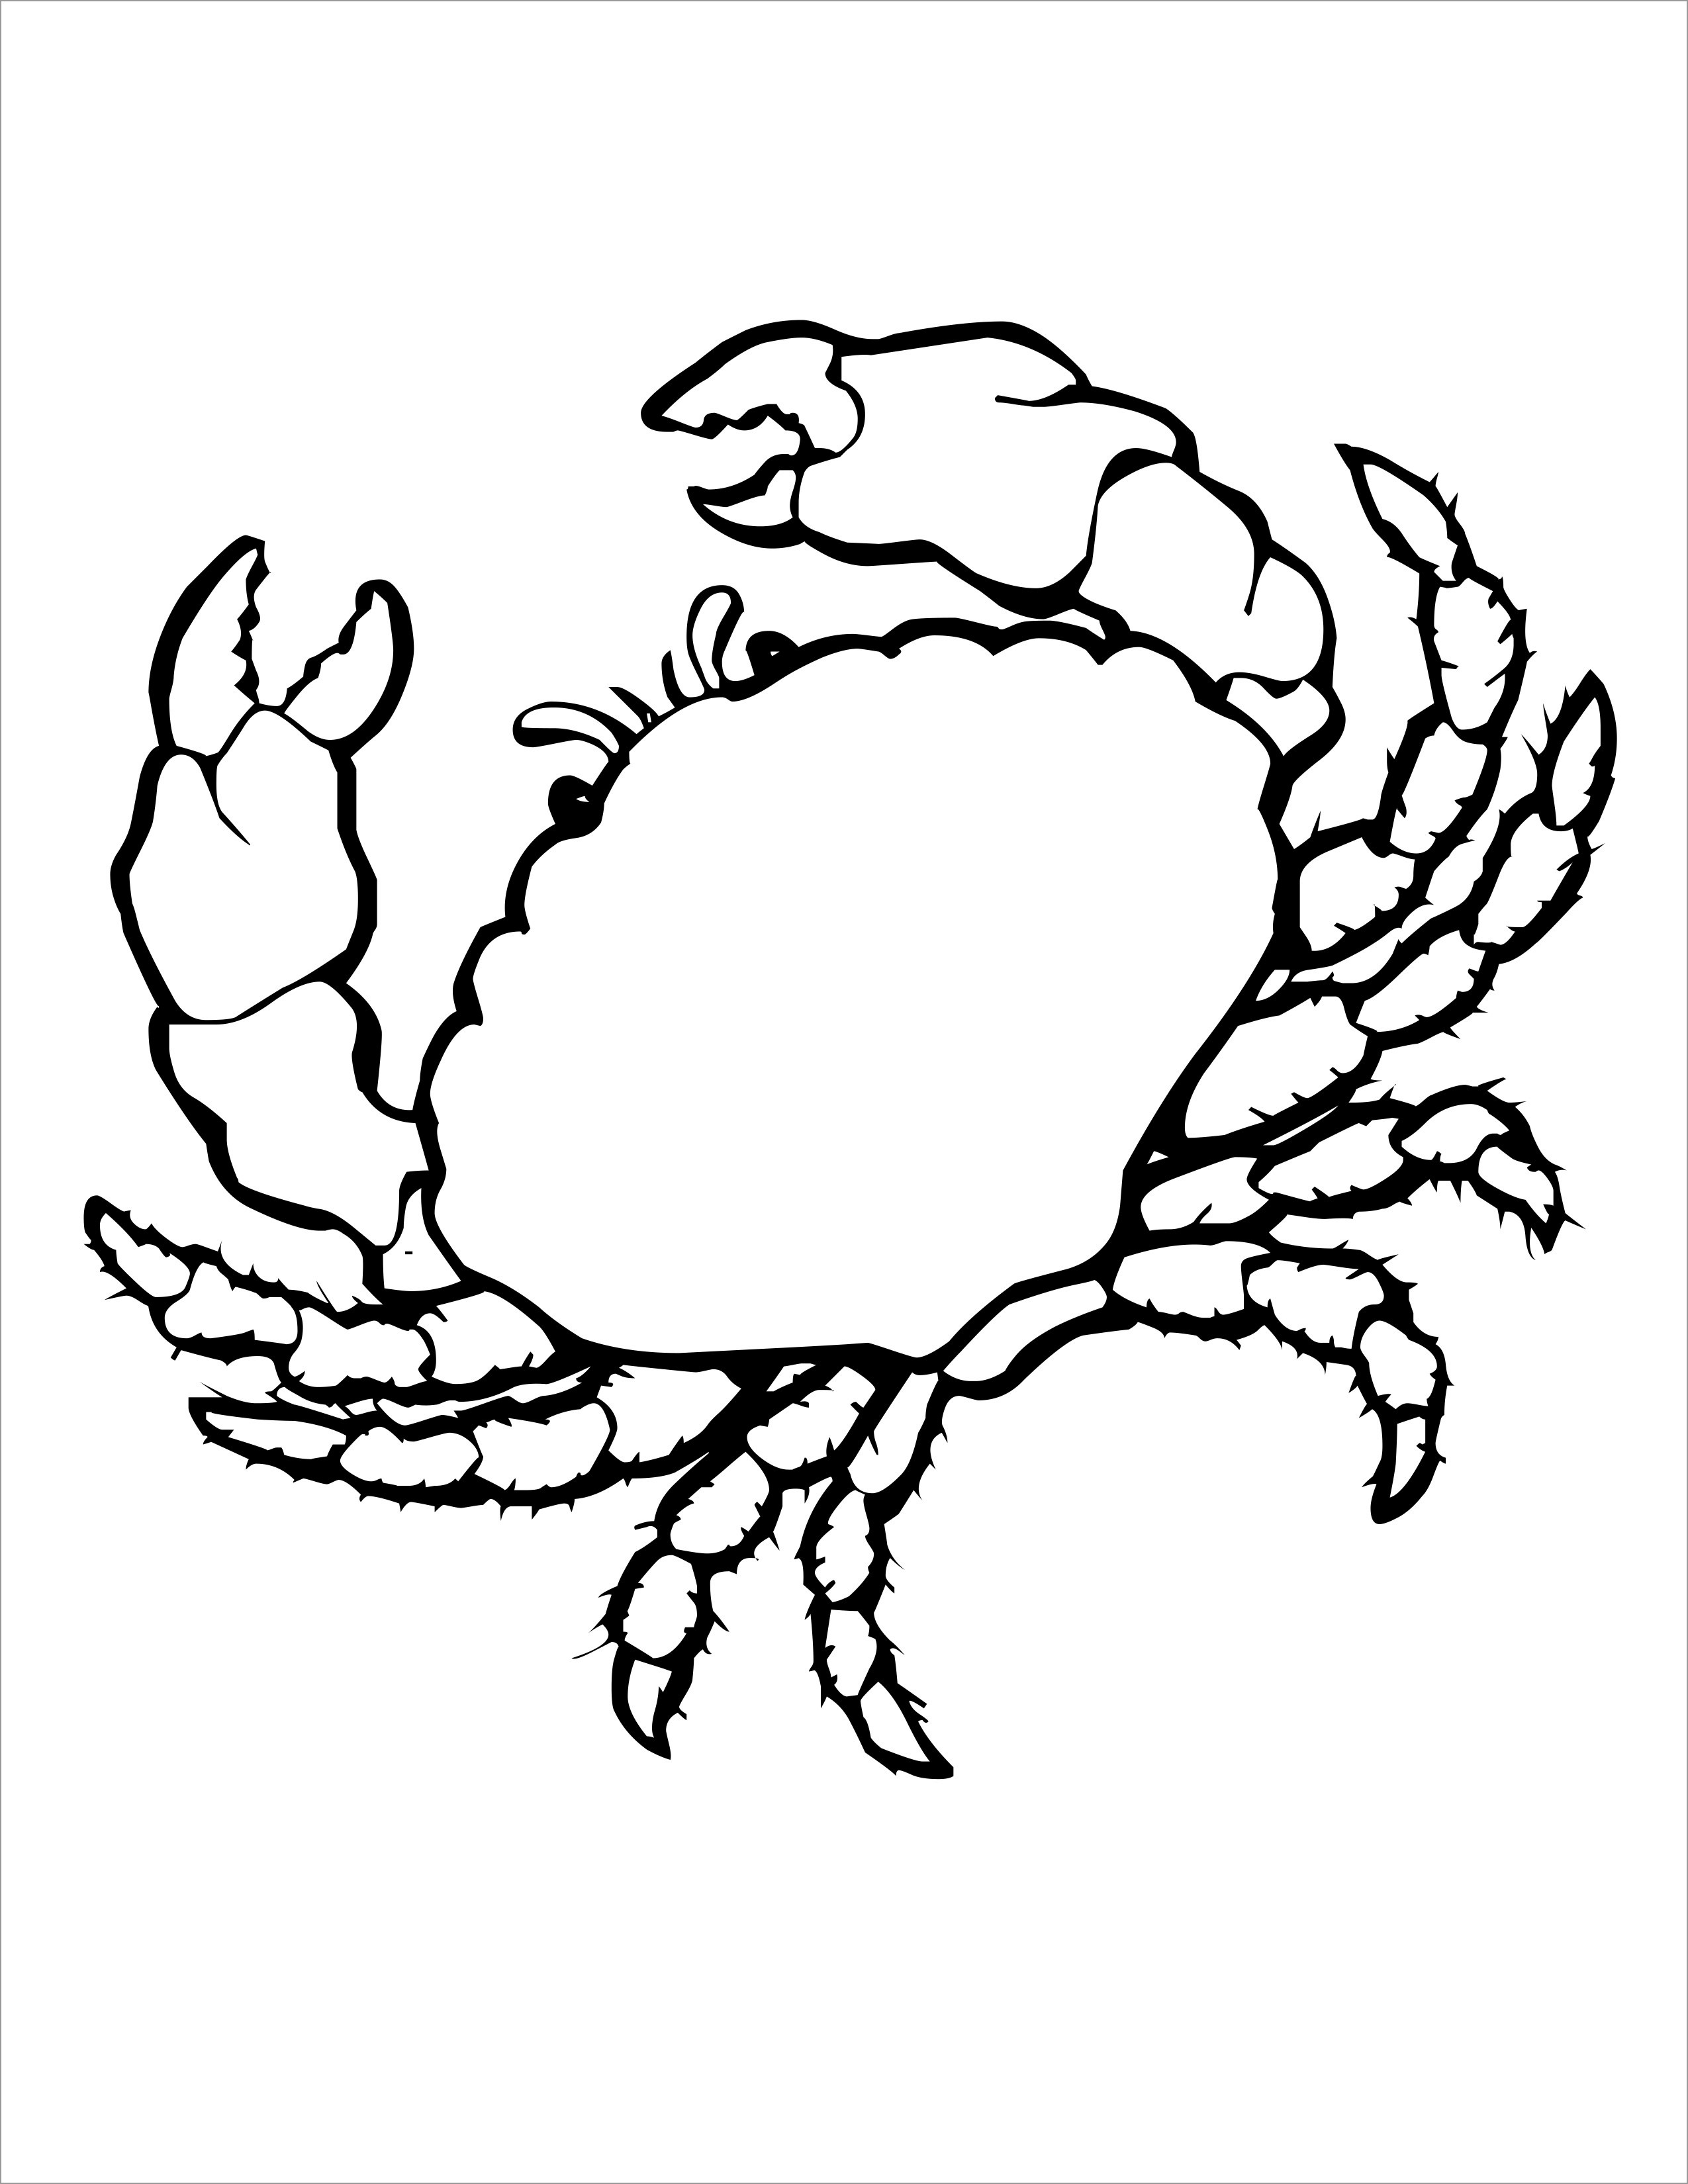 Realistic Crab Coloring Page to Print